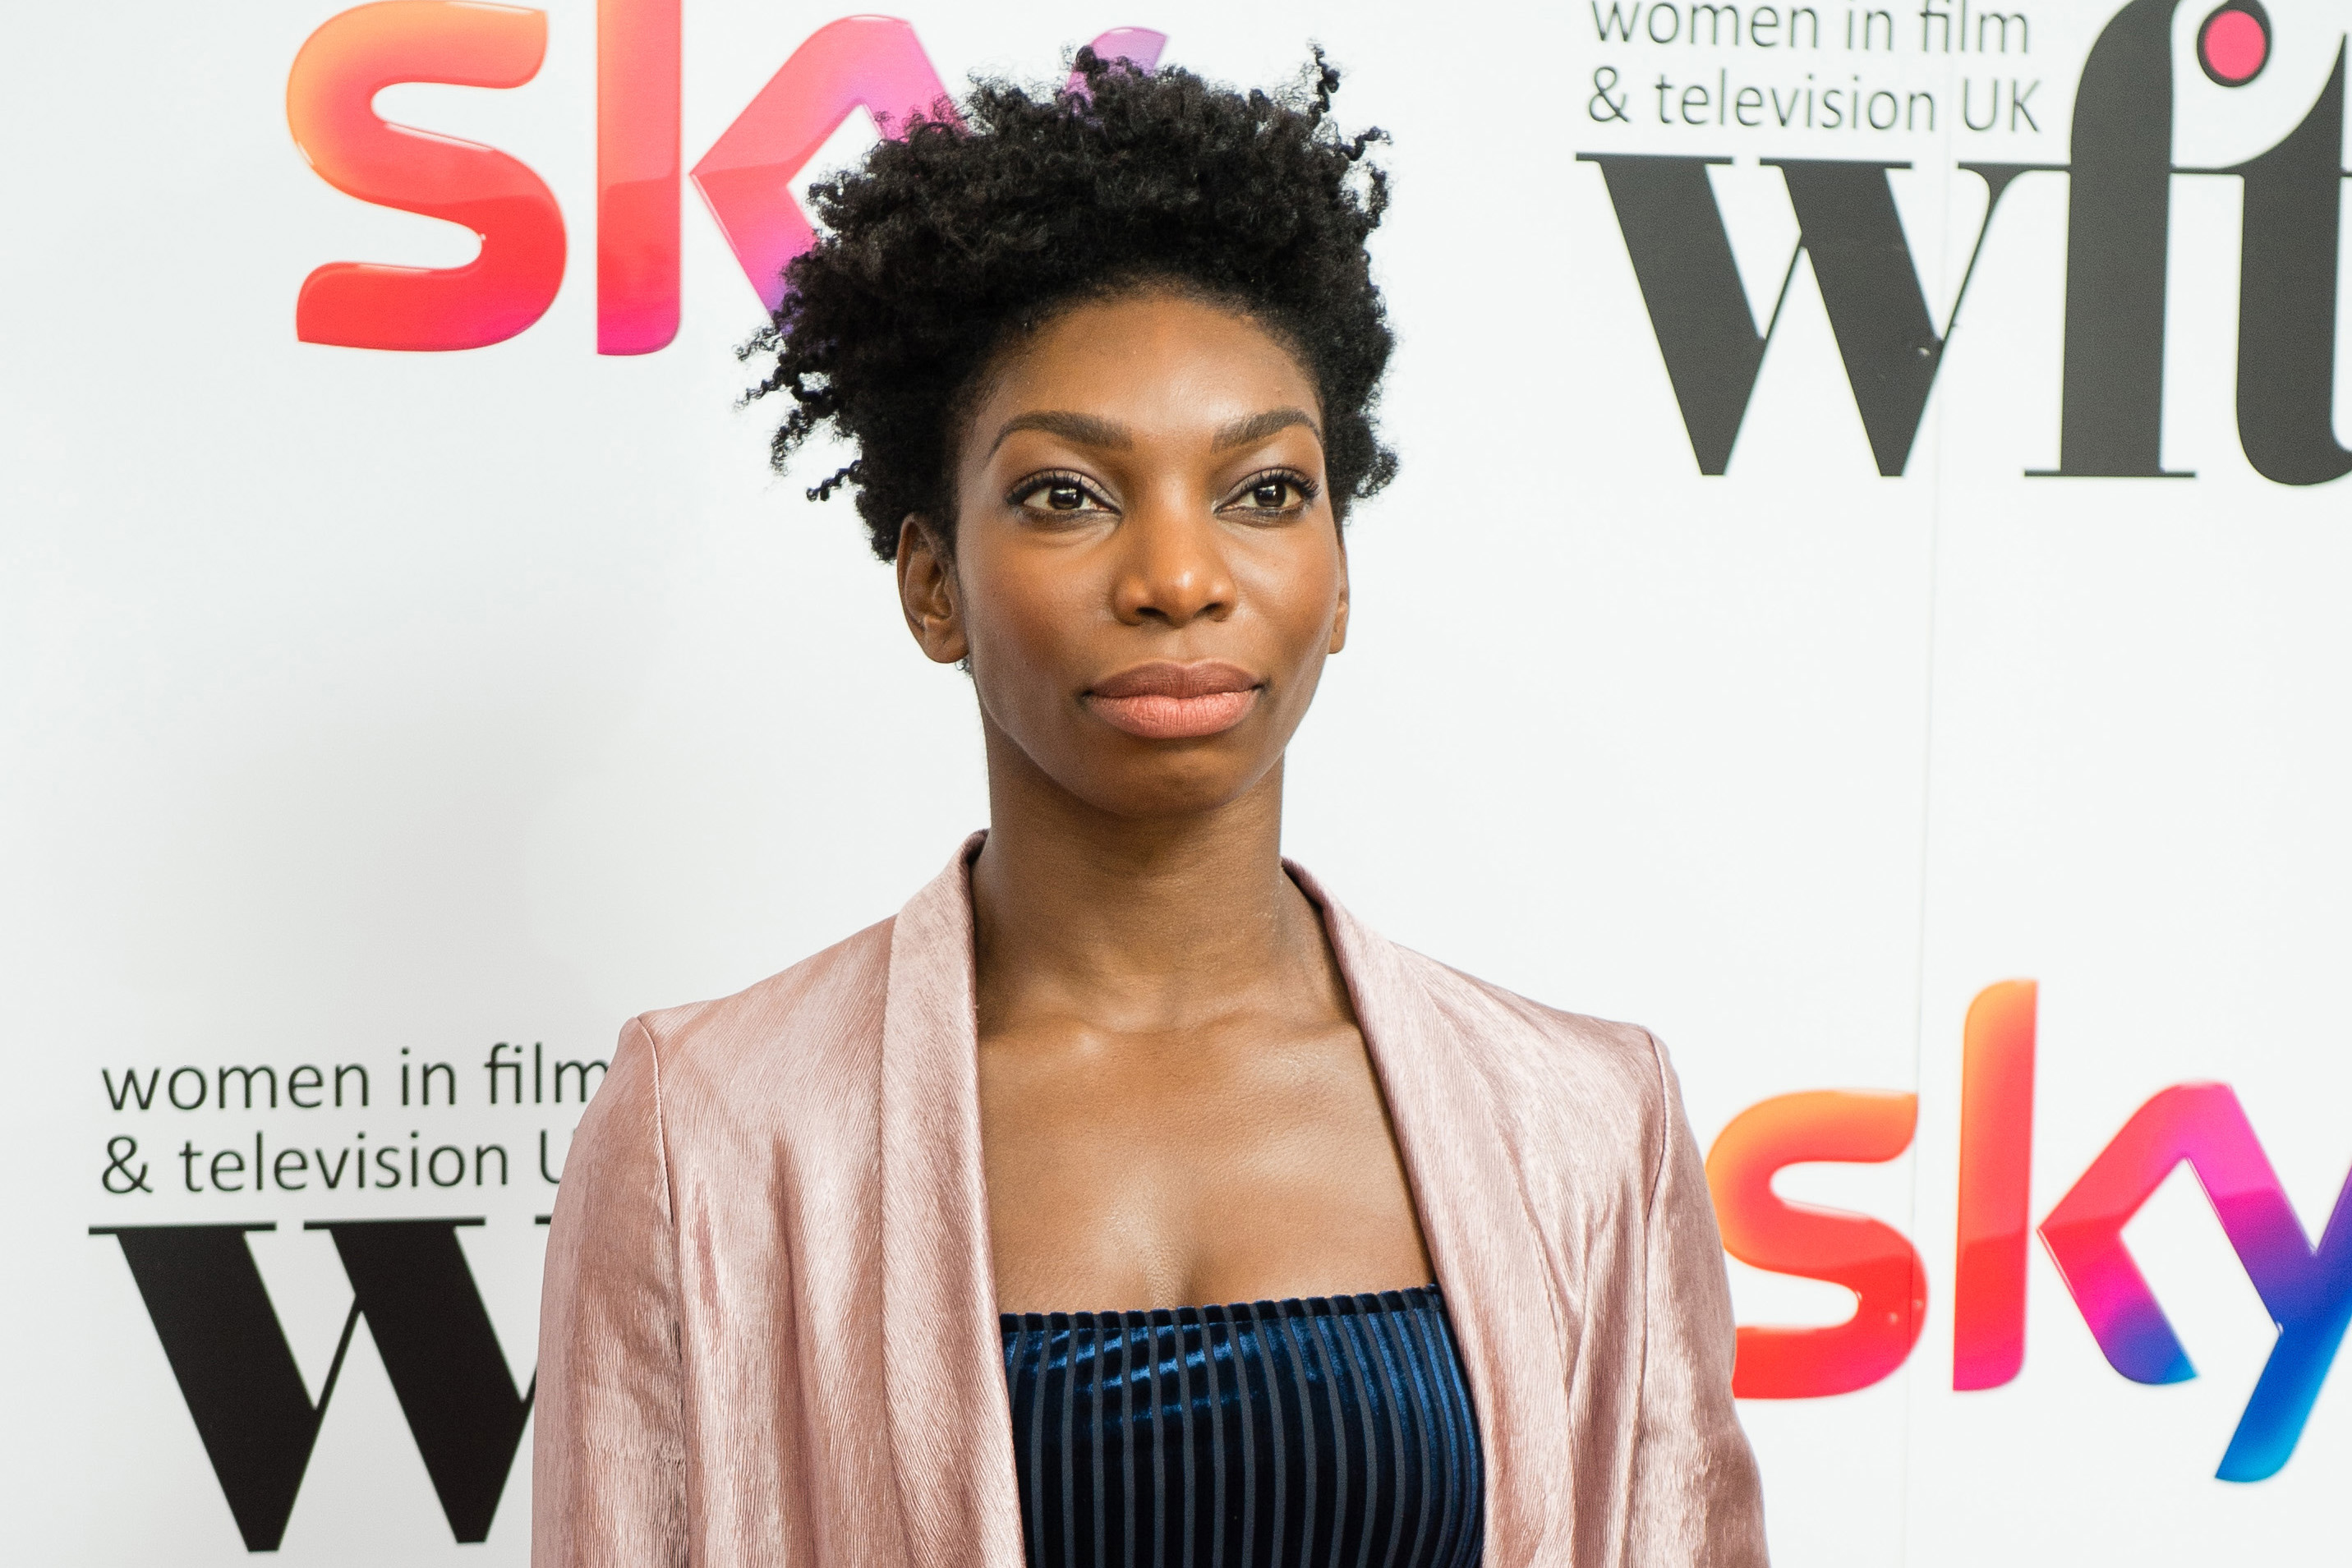 Michaela Coel attends the Sky Women In Film & TV Awards at London Hilton on December 2, 2016 in London, England. (Jeff Spicer—Getty Images)